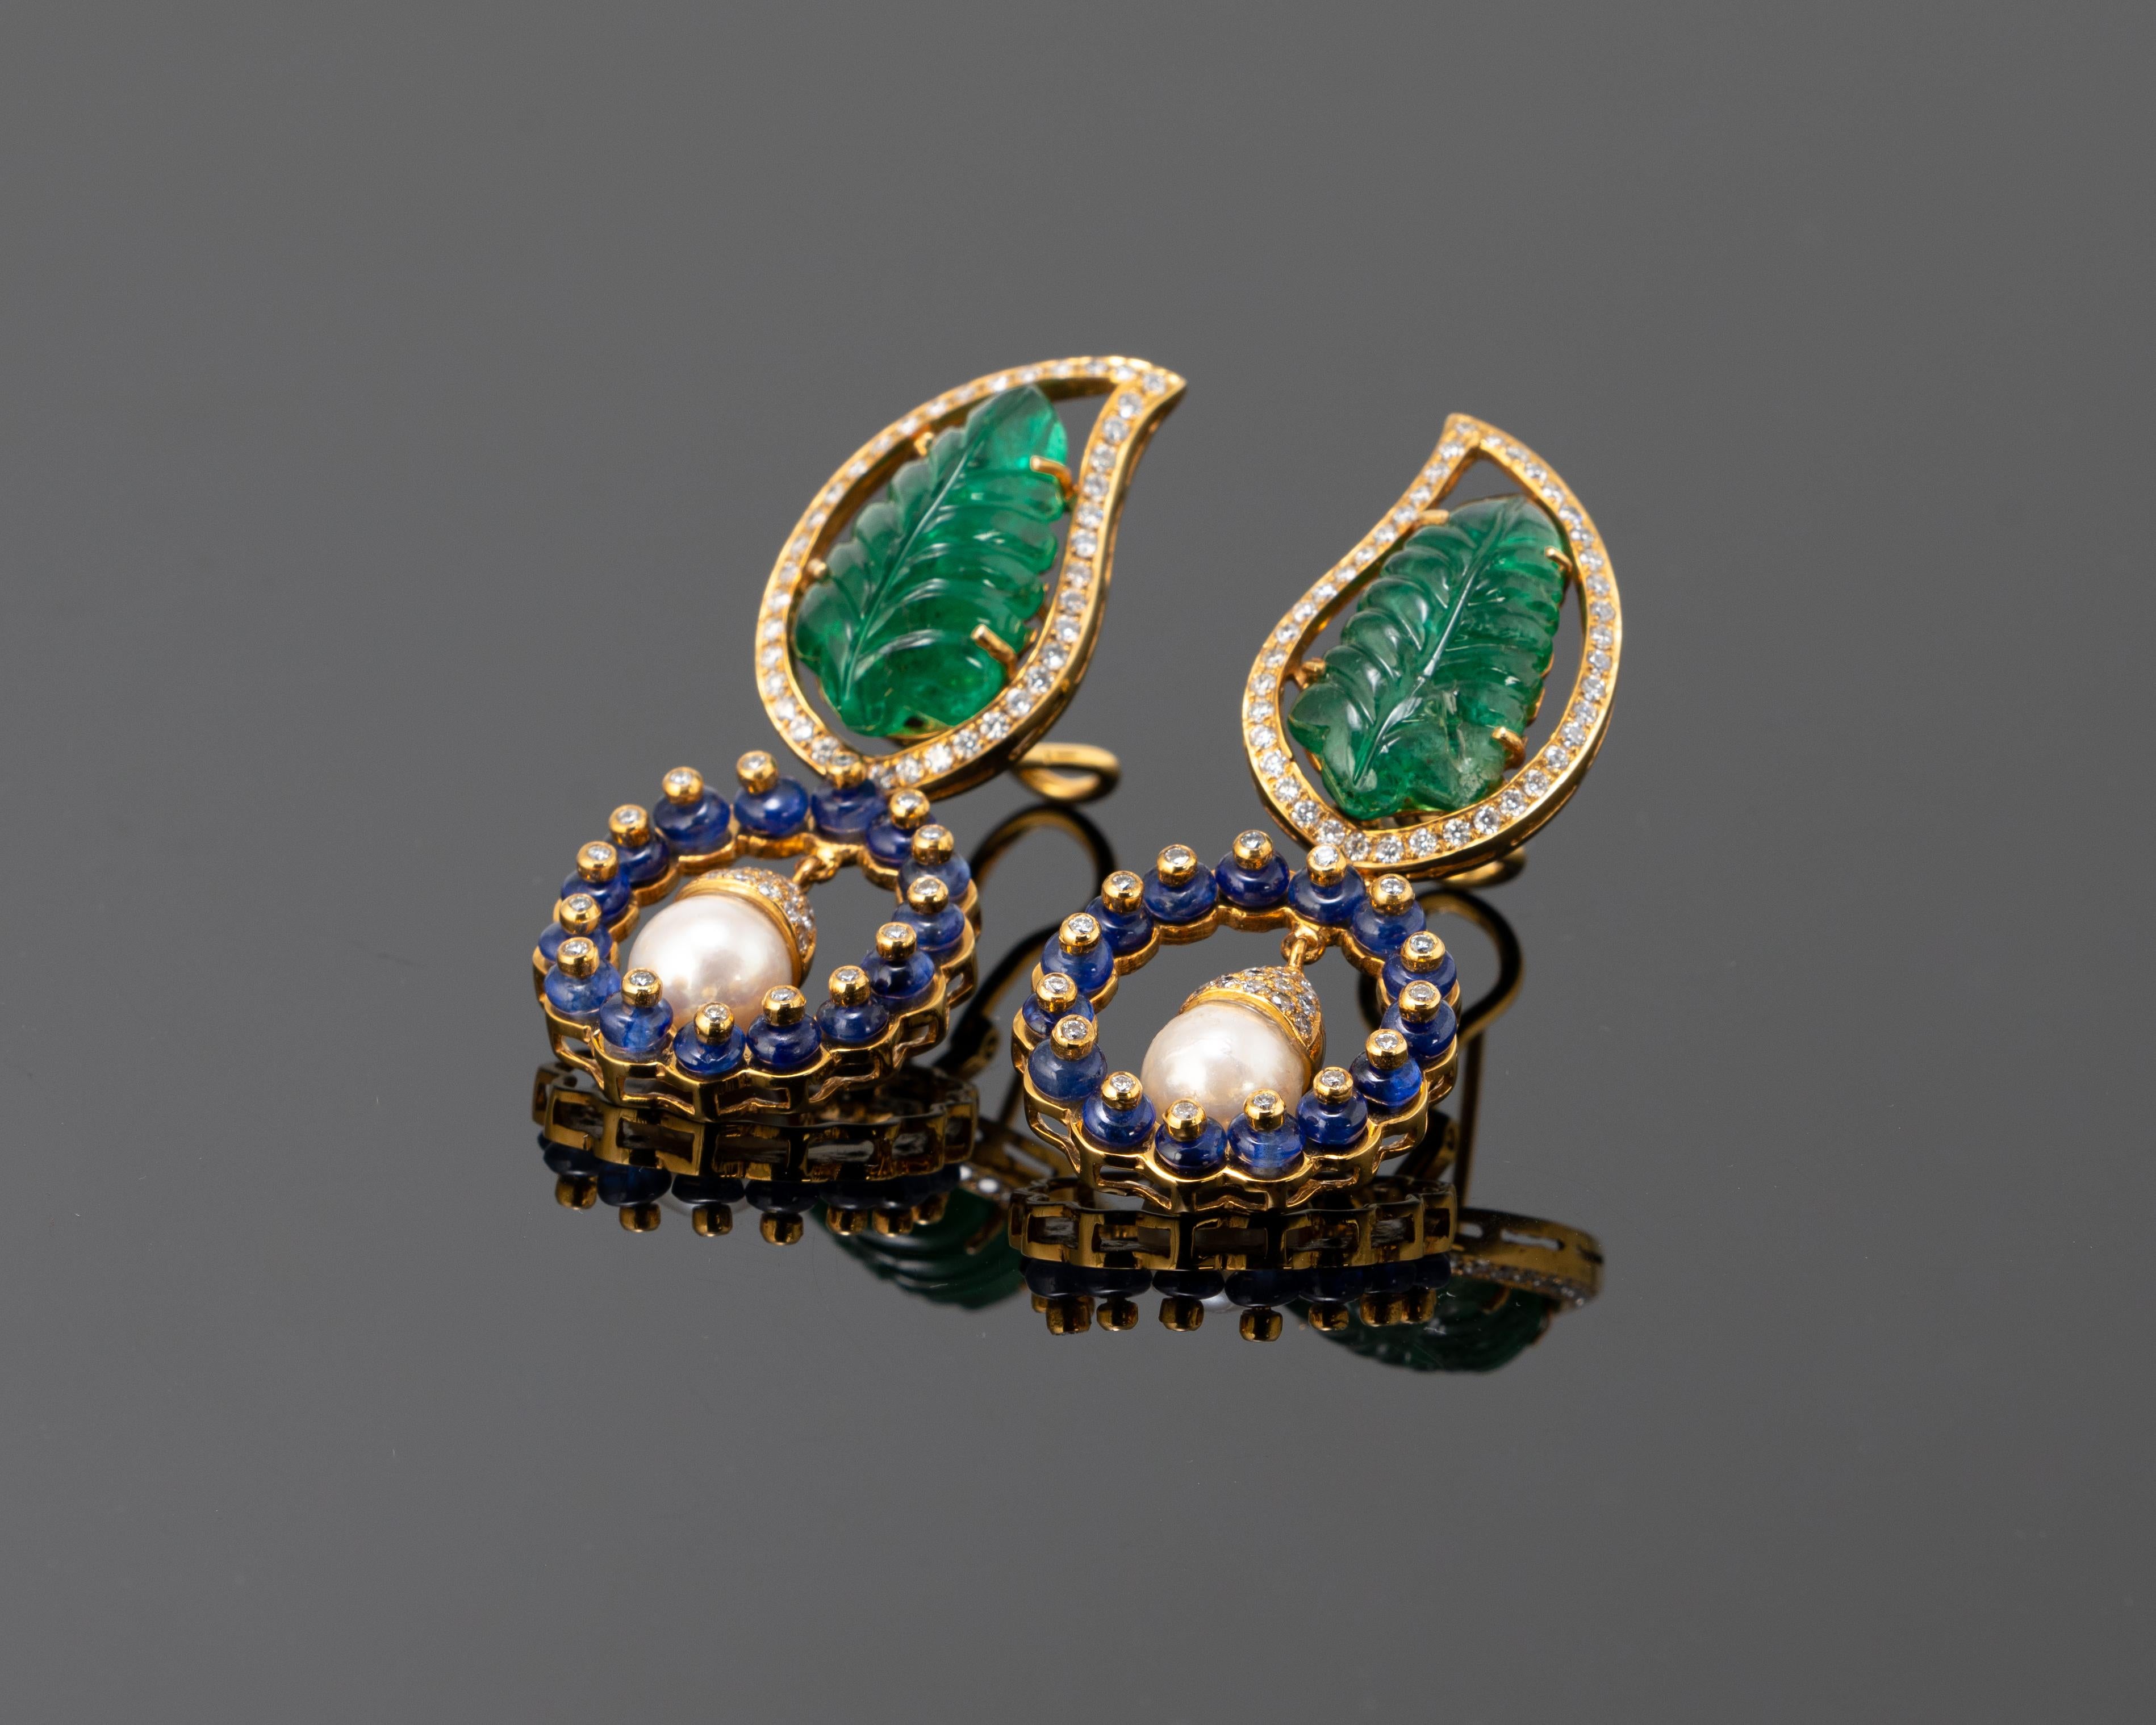 A gorgeous pair of art-deco, carved Zambian Emerald leaves dangling earrings, with Sapphire and South Sea Pearls set in solid 18K Yellow Gold. The earrings are around 1.5inches long, and have an omega and push-pull backing, making it more secure to